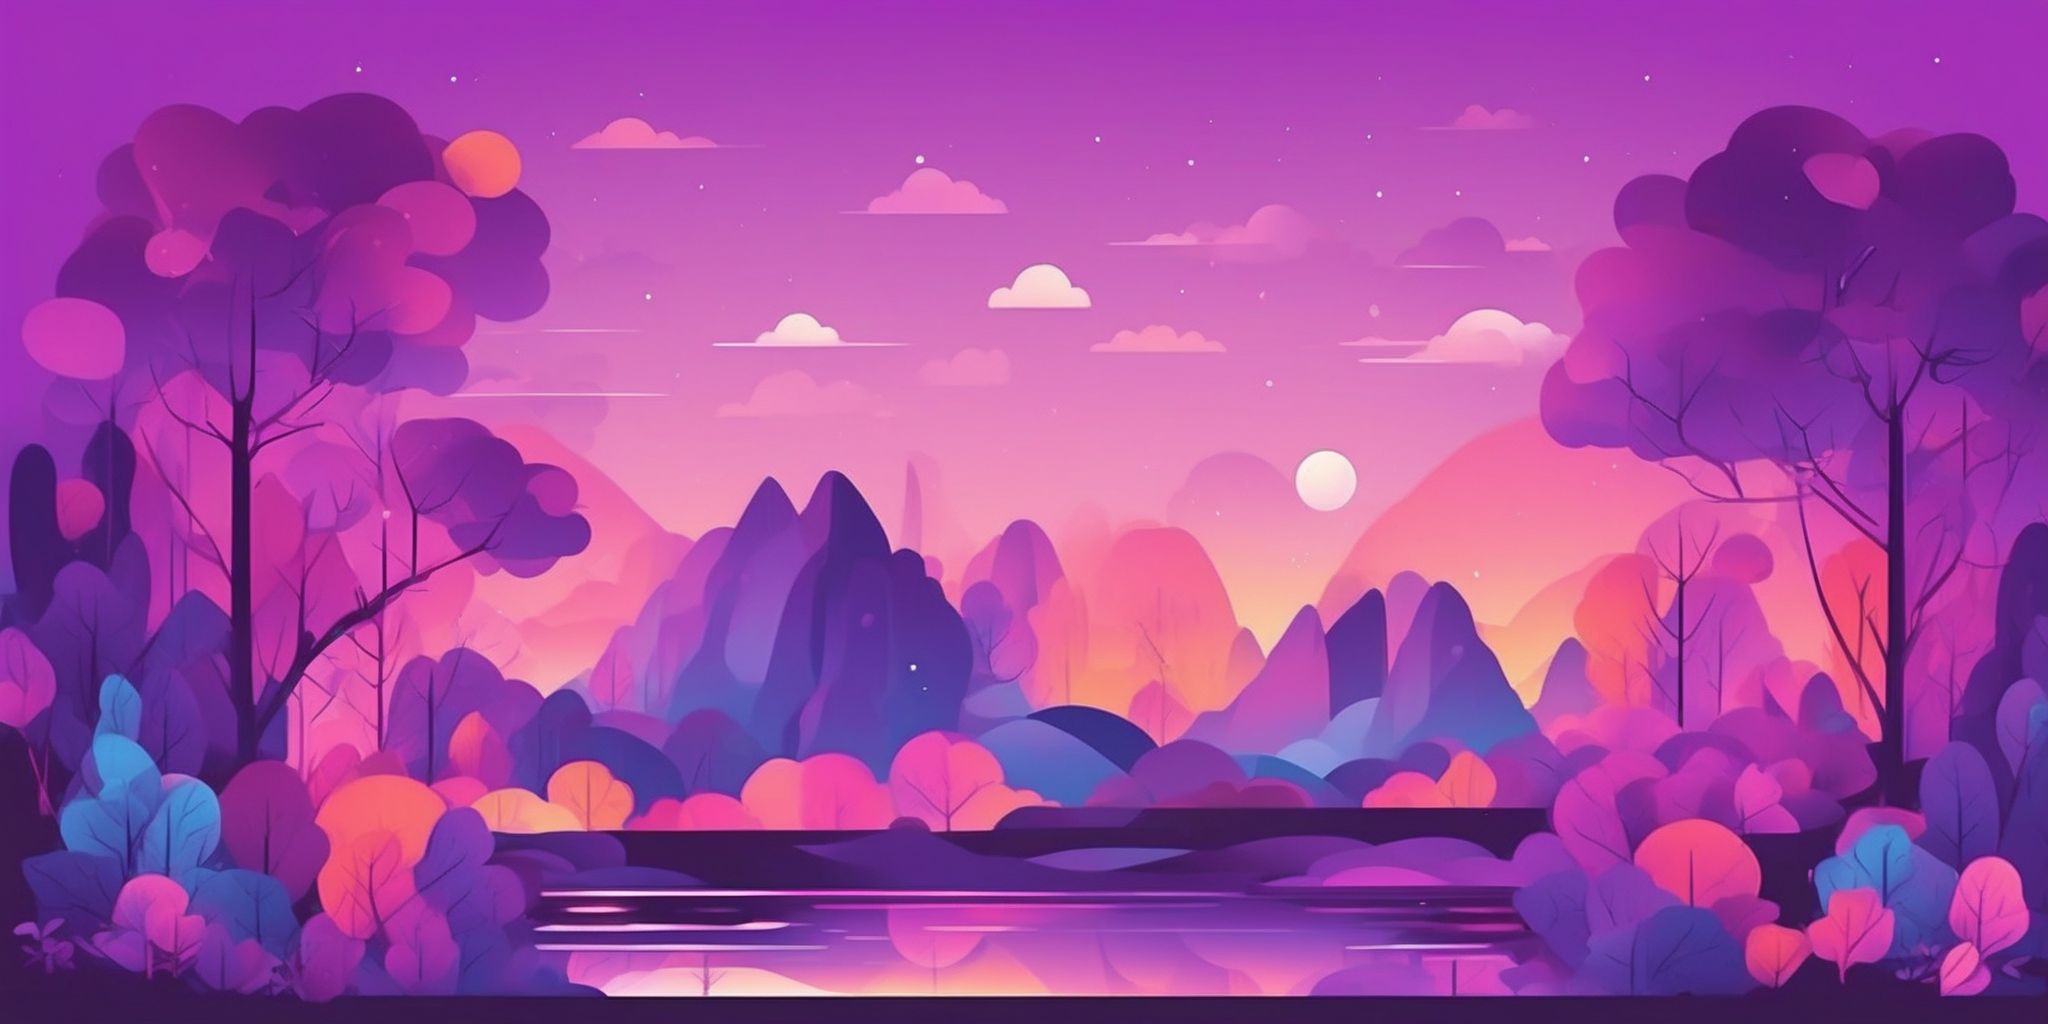 beginners in flat illustration style, colorful purple gradient colors